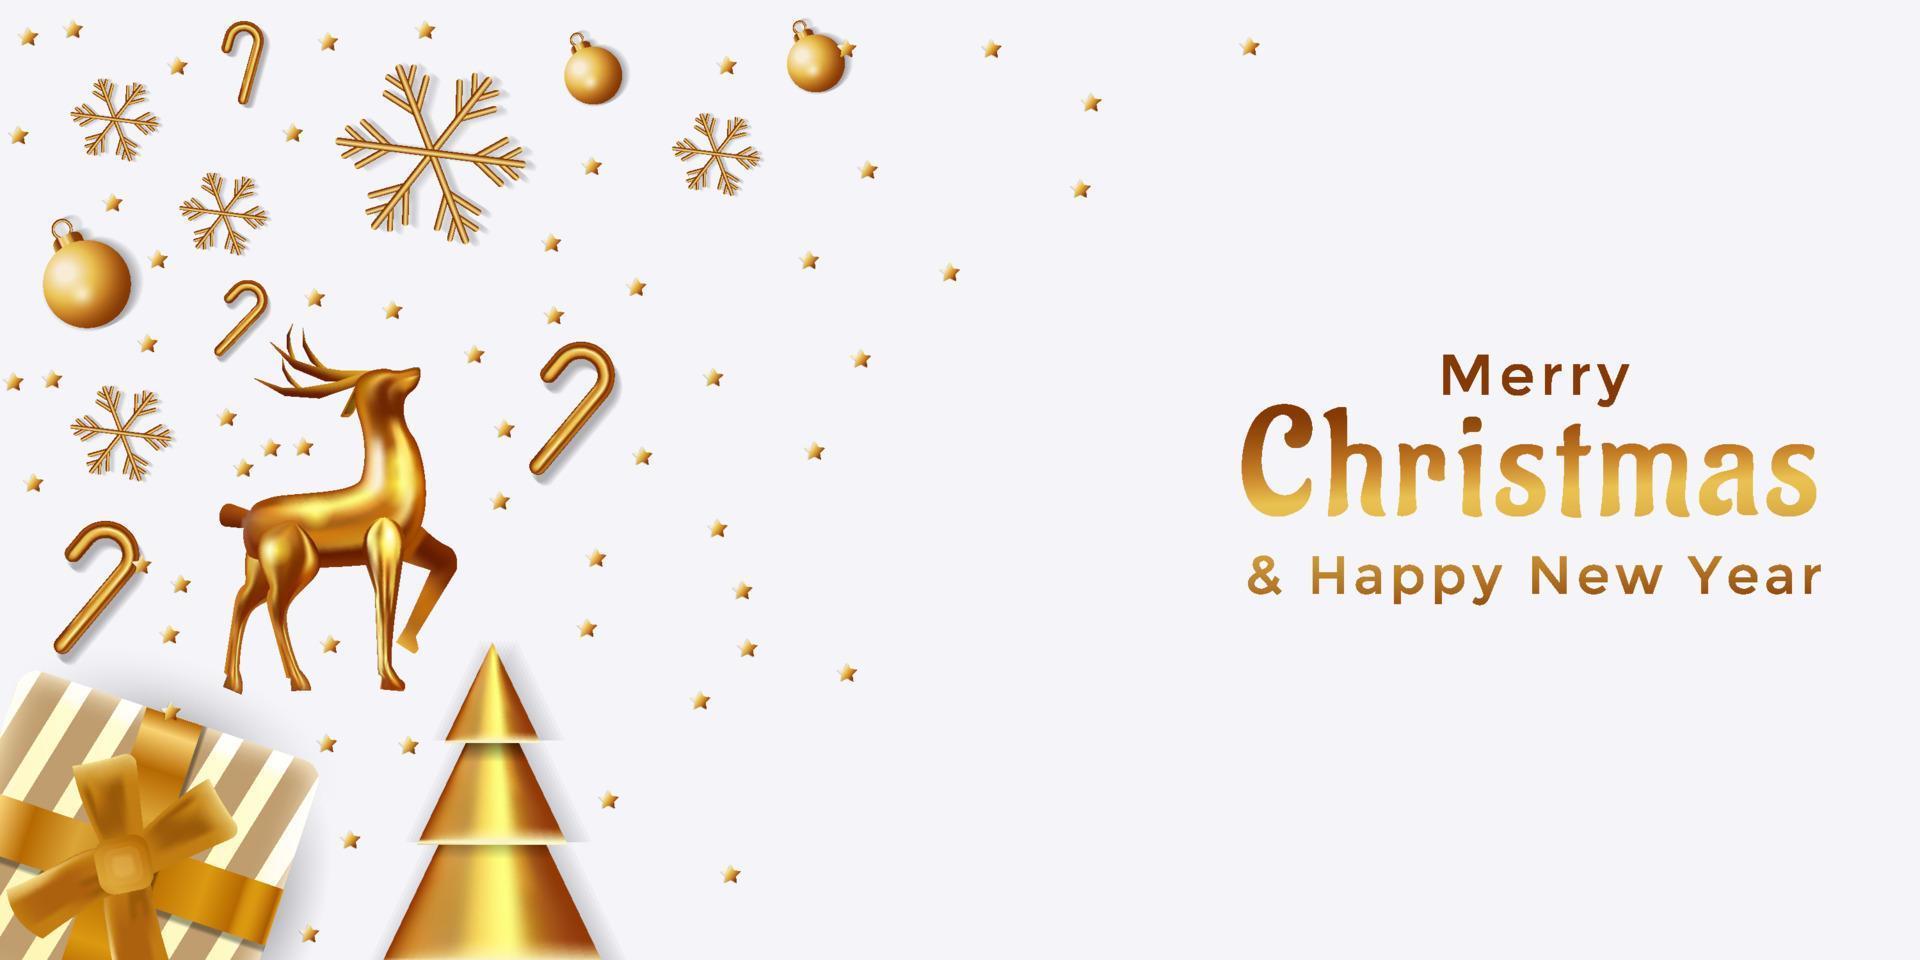 merry christmas and happy new year with golden ornament. stars, snowflake, lamps, deer, and christmas pine tree with gold effect. luxury Christmas background vector